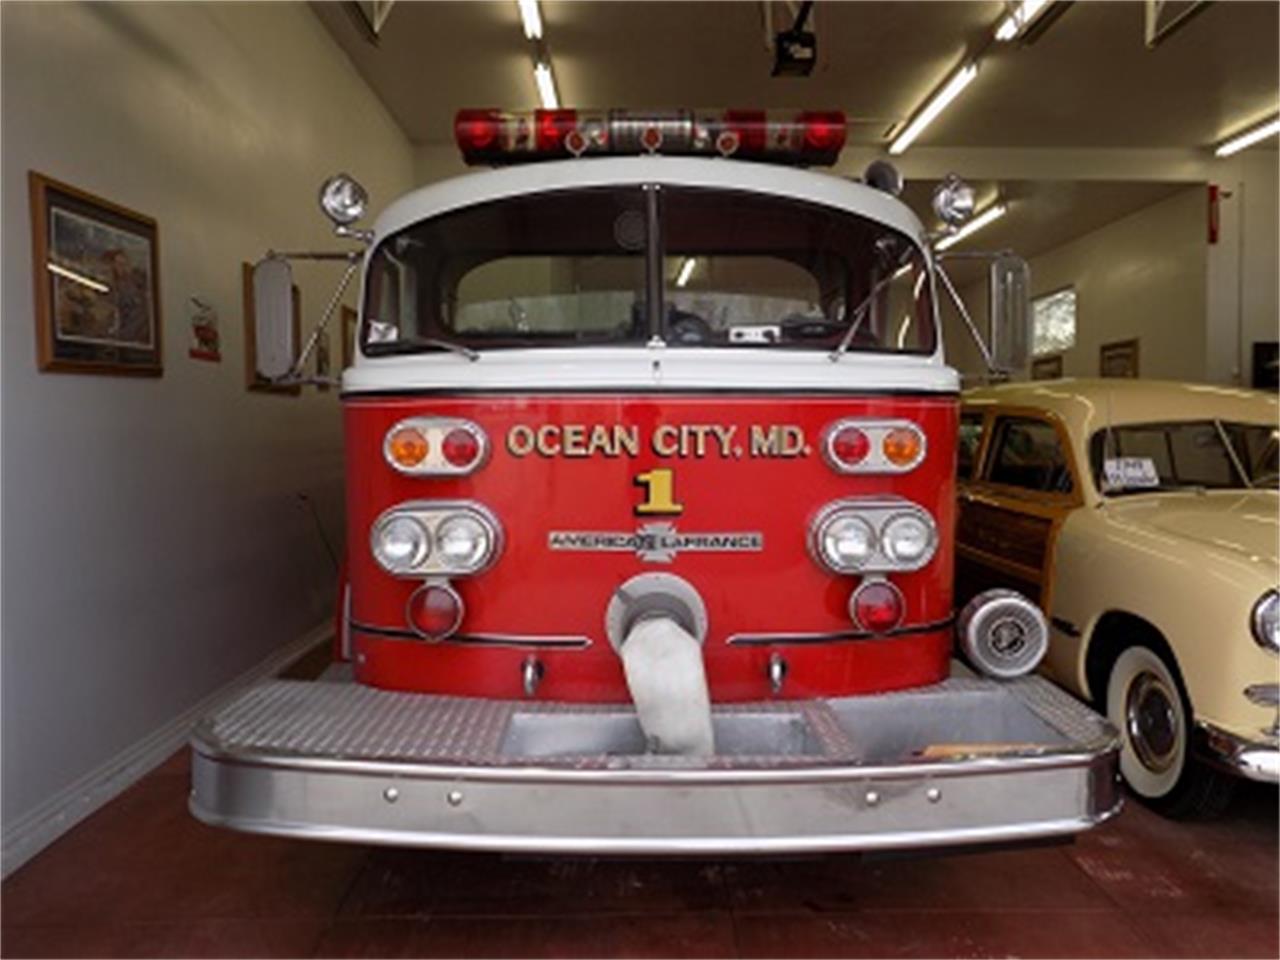 american lafrance fire engines